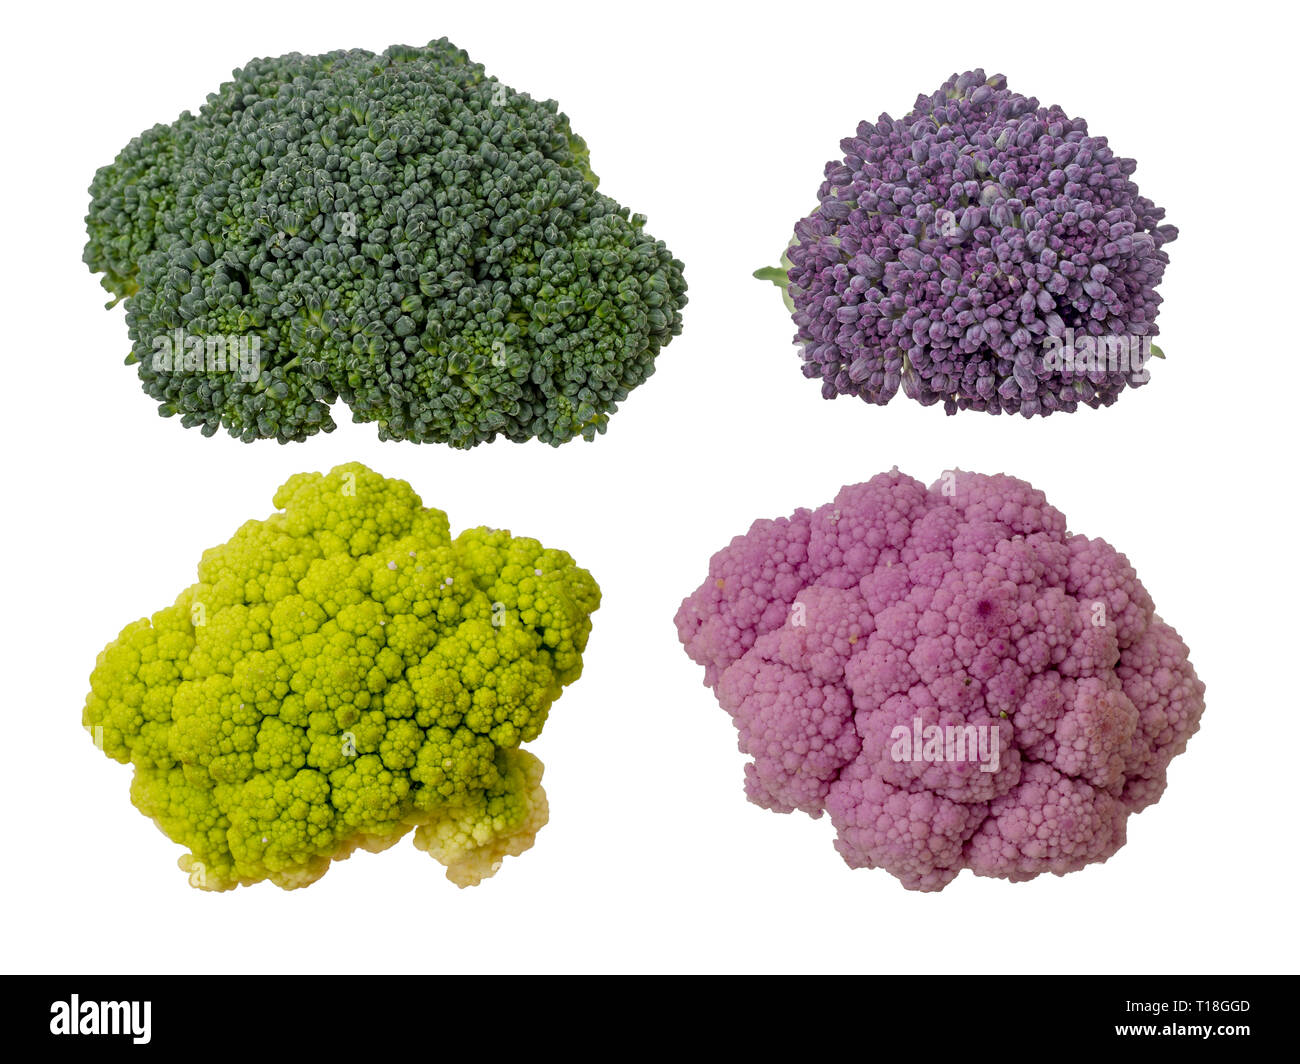 Colourful vegetables, florets isolated on white. Raw cauliflower, broccoli and purple sprouting. Healthy assortment. Stock Photo